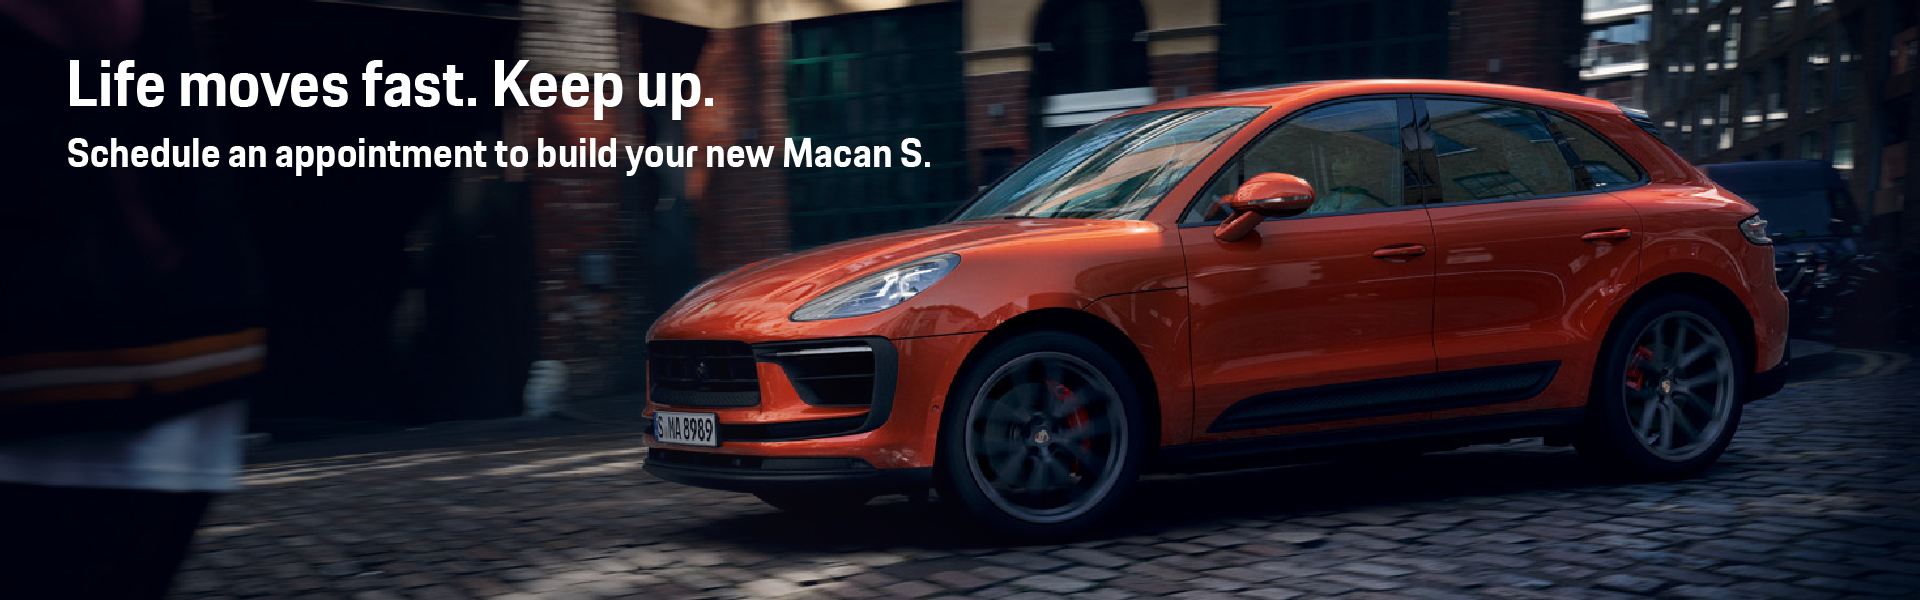 Macan inventory